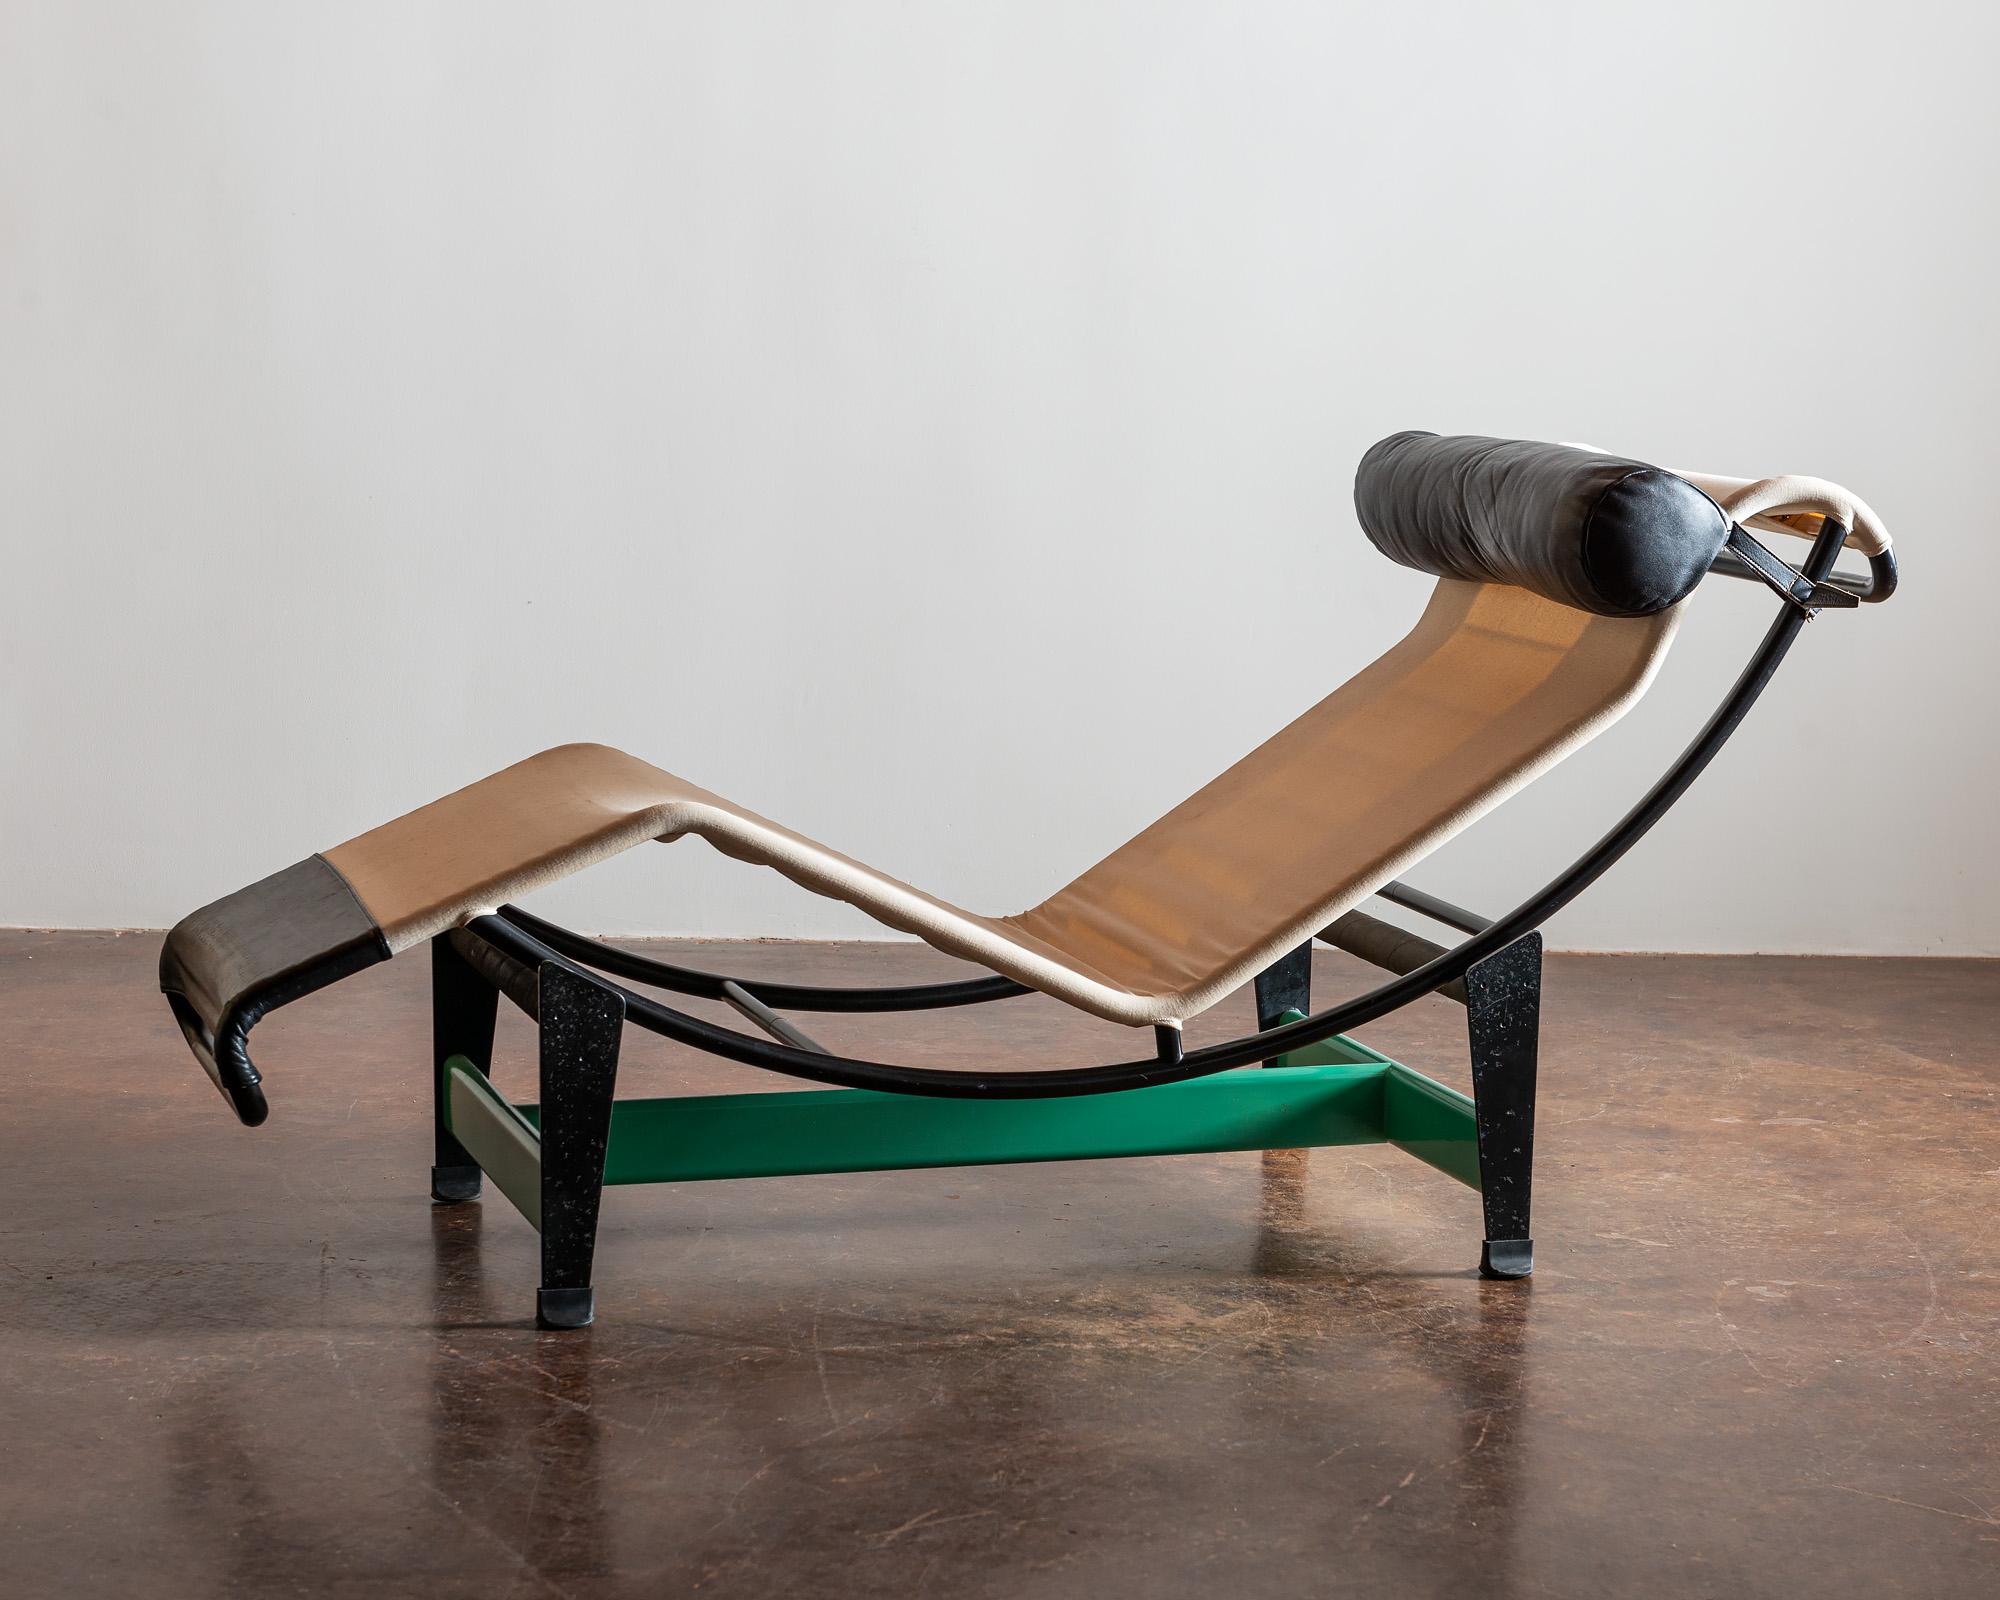 European Cassina Re-edition Le Corbusier LC4 Chaise with Green Base